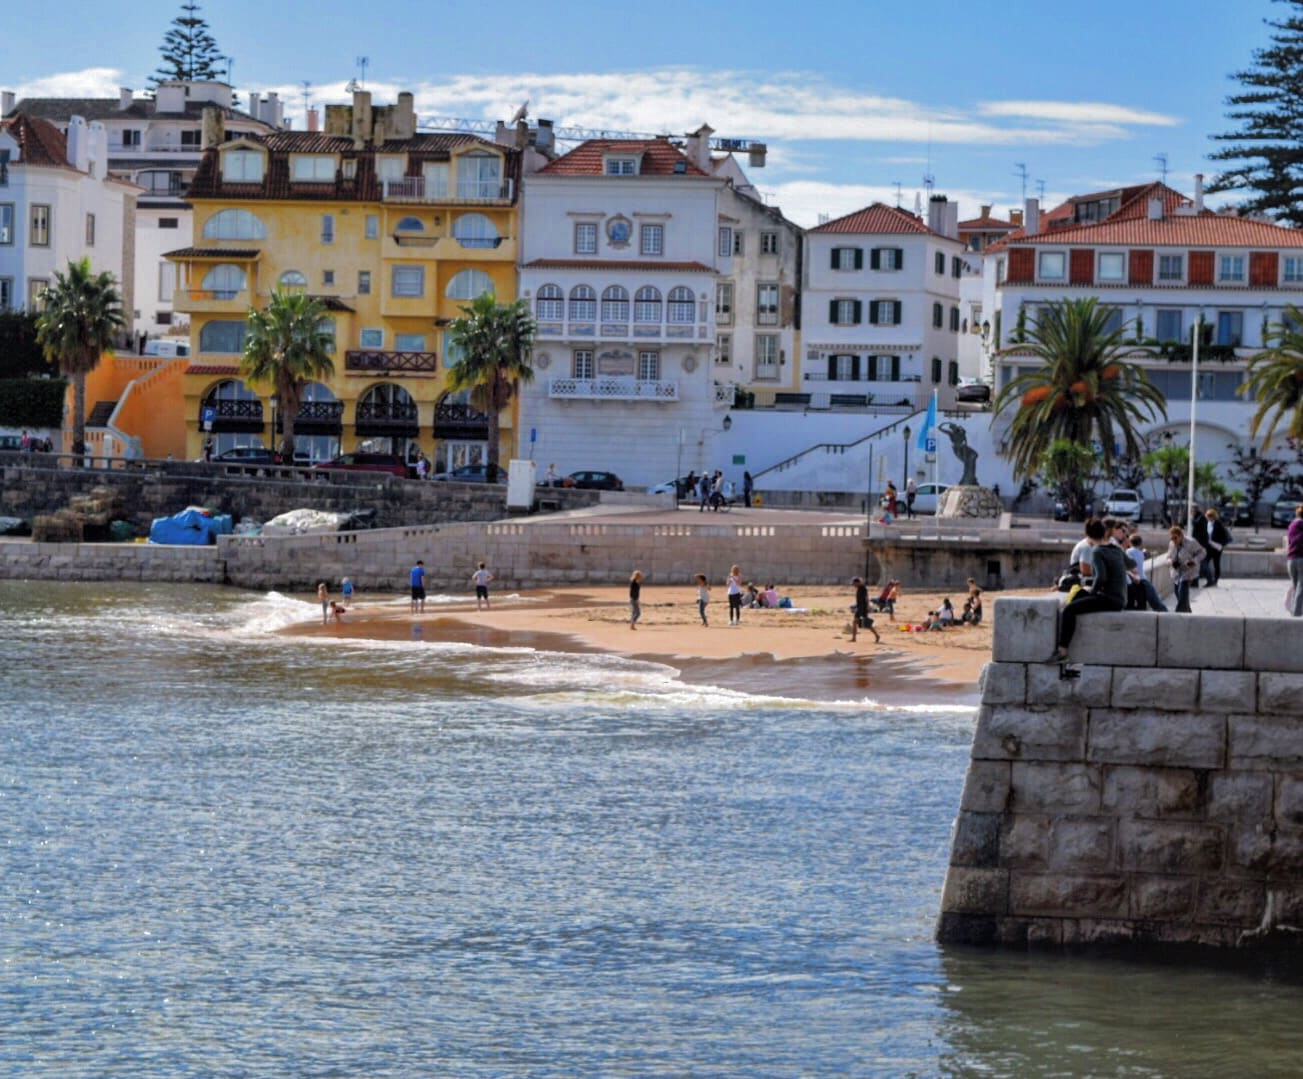 Cascais in the region of Sintra in Portugal